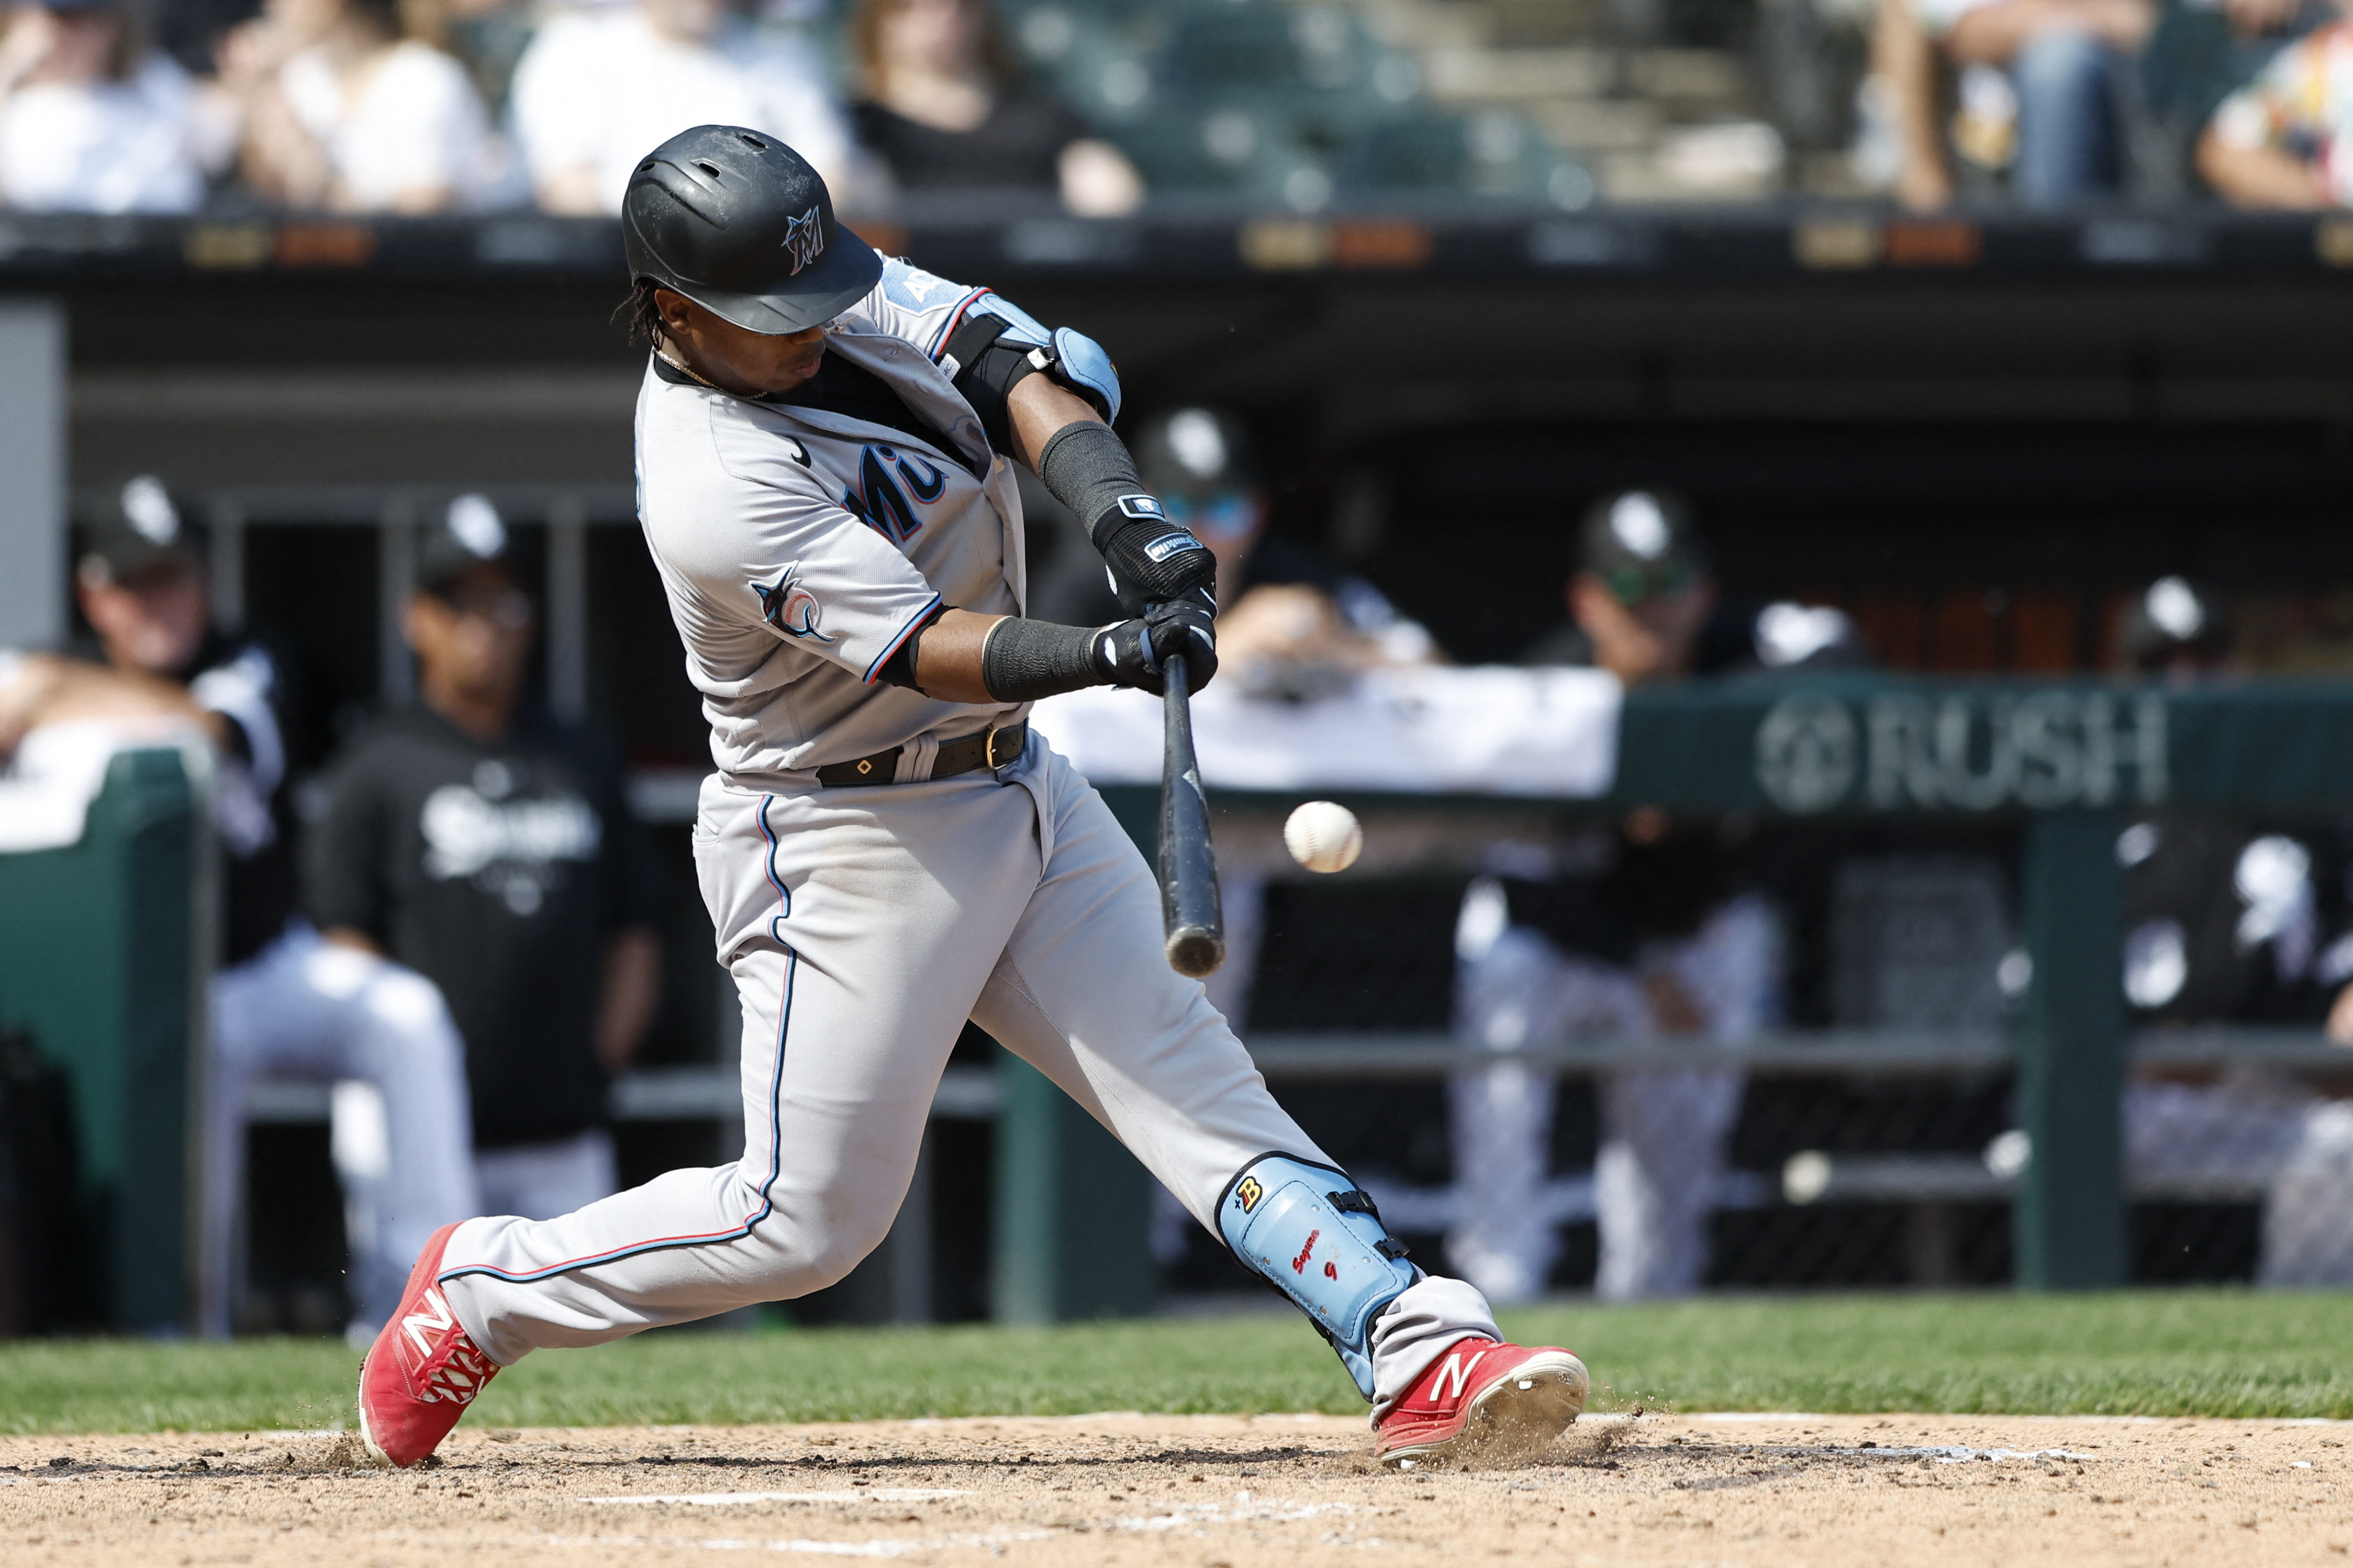 Jean Segura helps Miami Marlins rally past Chicago White Sox for 5